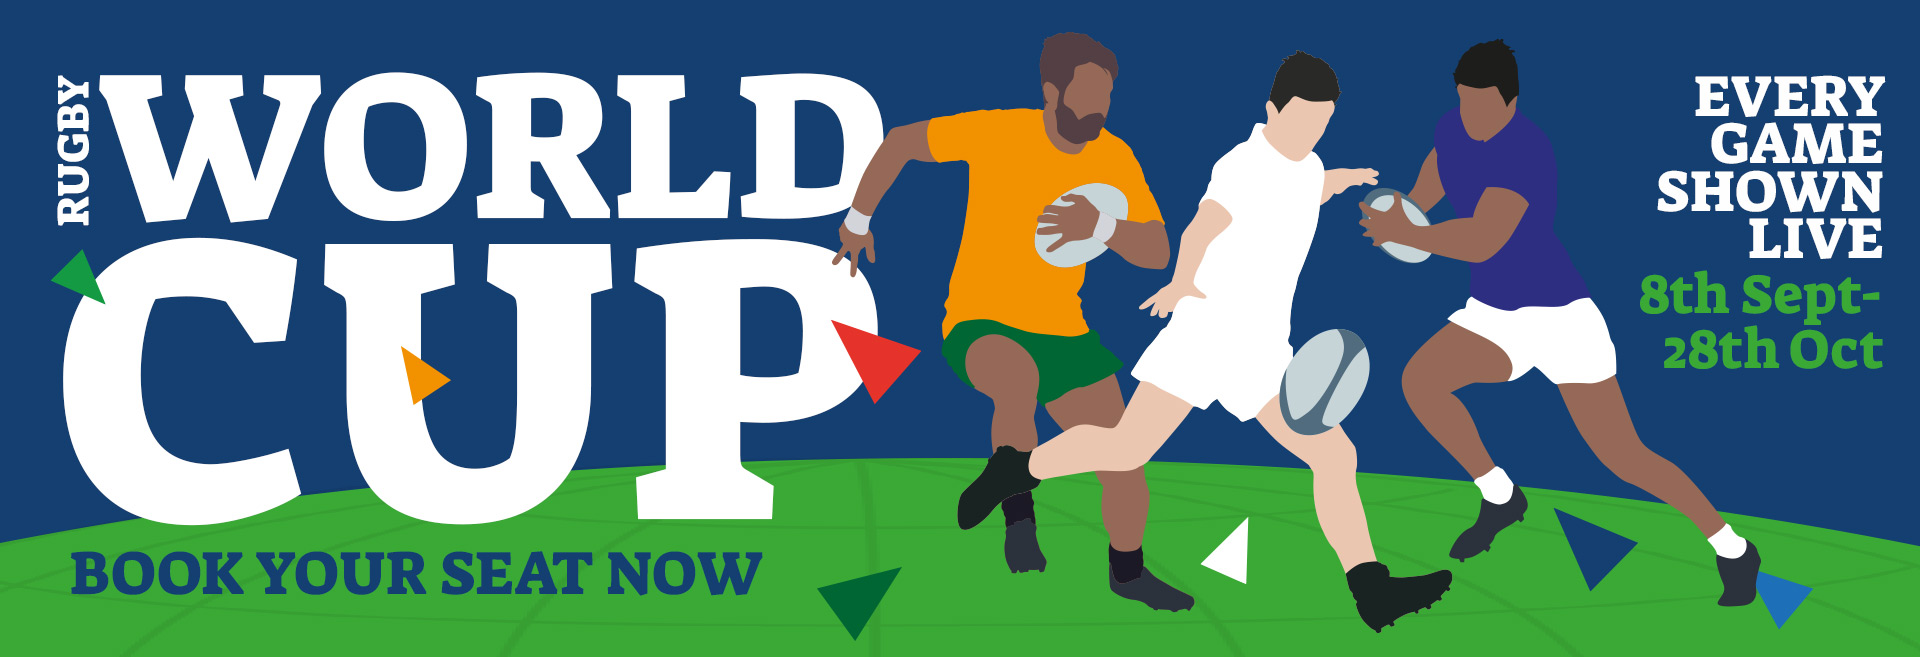 Watch the Rugby World Cup at The Mall